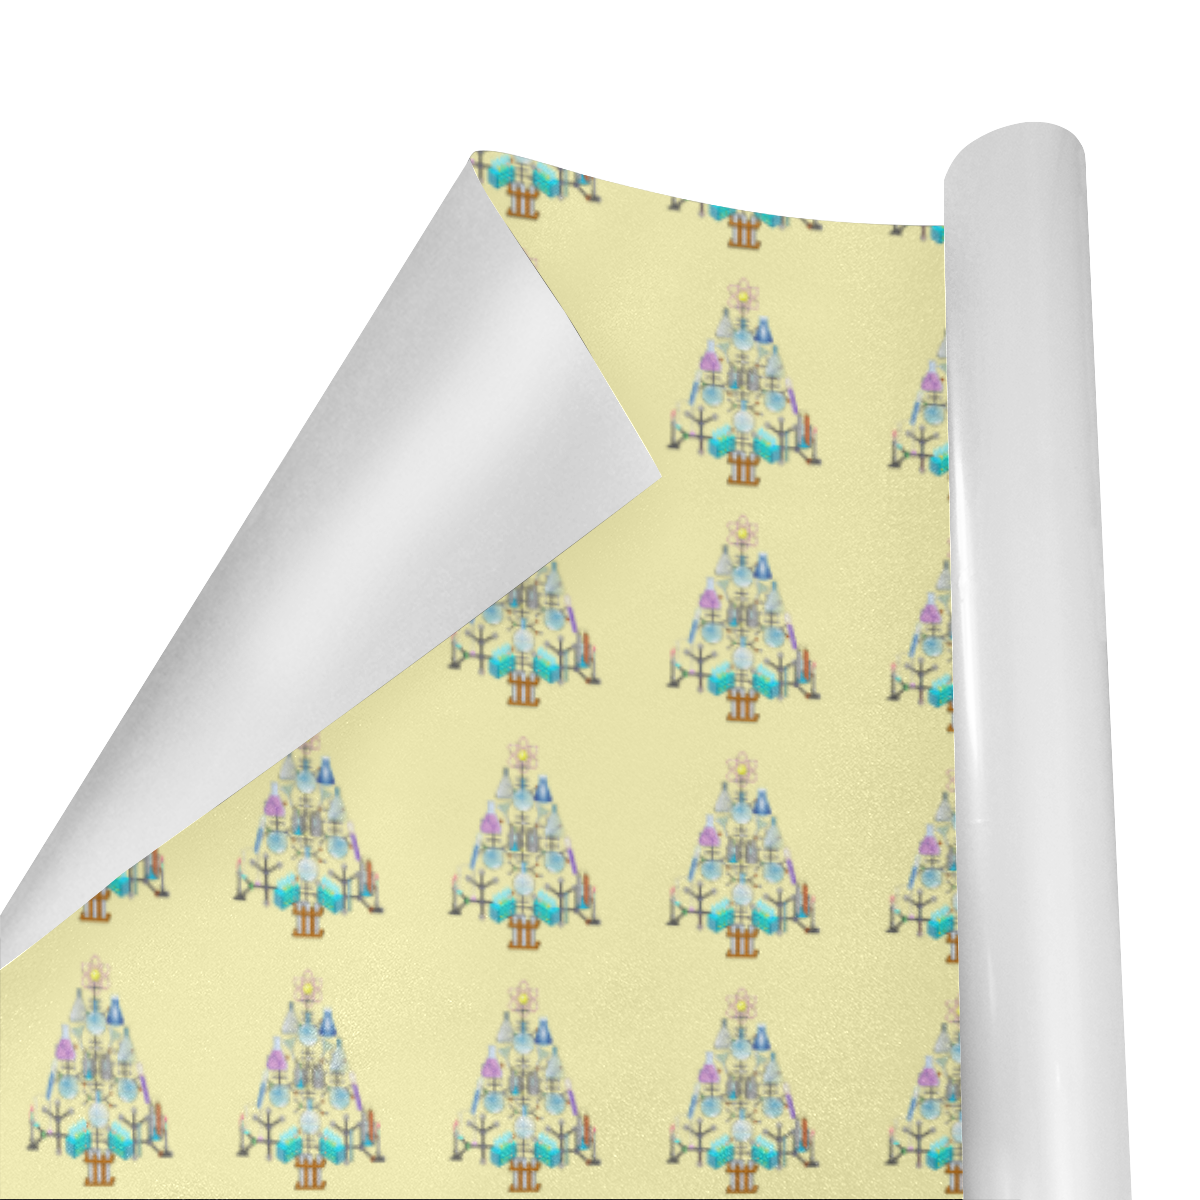 Oh Chemist Tree, Oh Chemistry, Science Christmas on Yellow Gift Wrapping Paper 58"x 23" (5 Rolls)